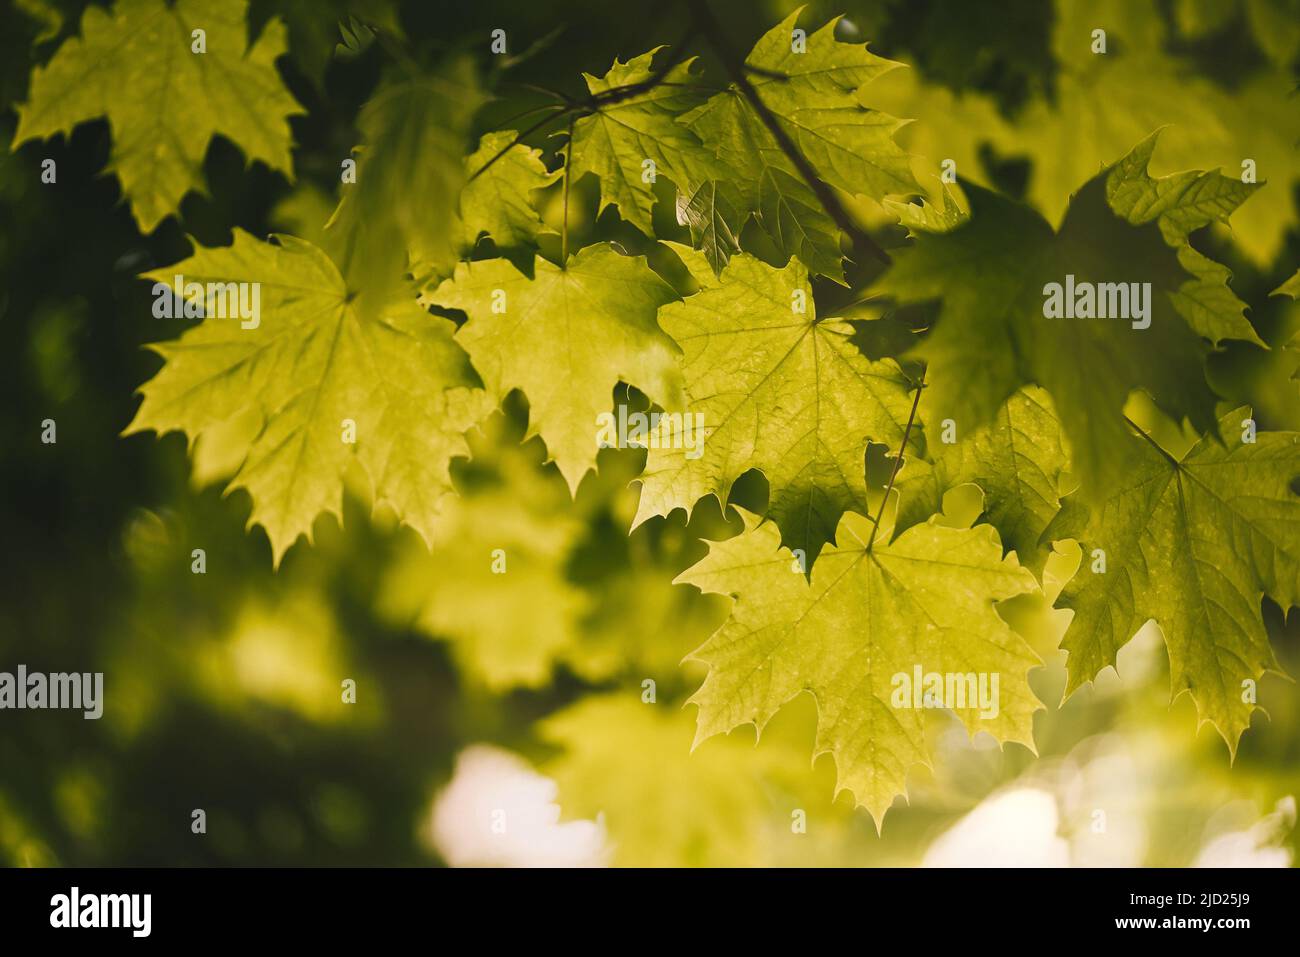 close-up of green maple leaves on tree, natural background Stock Photo